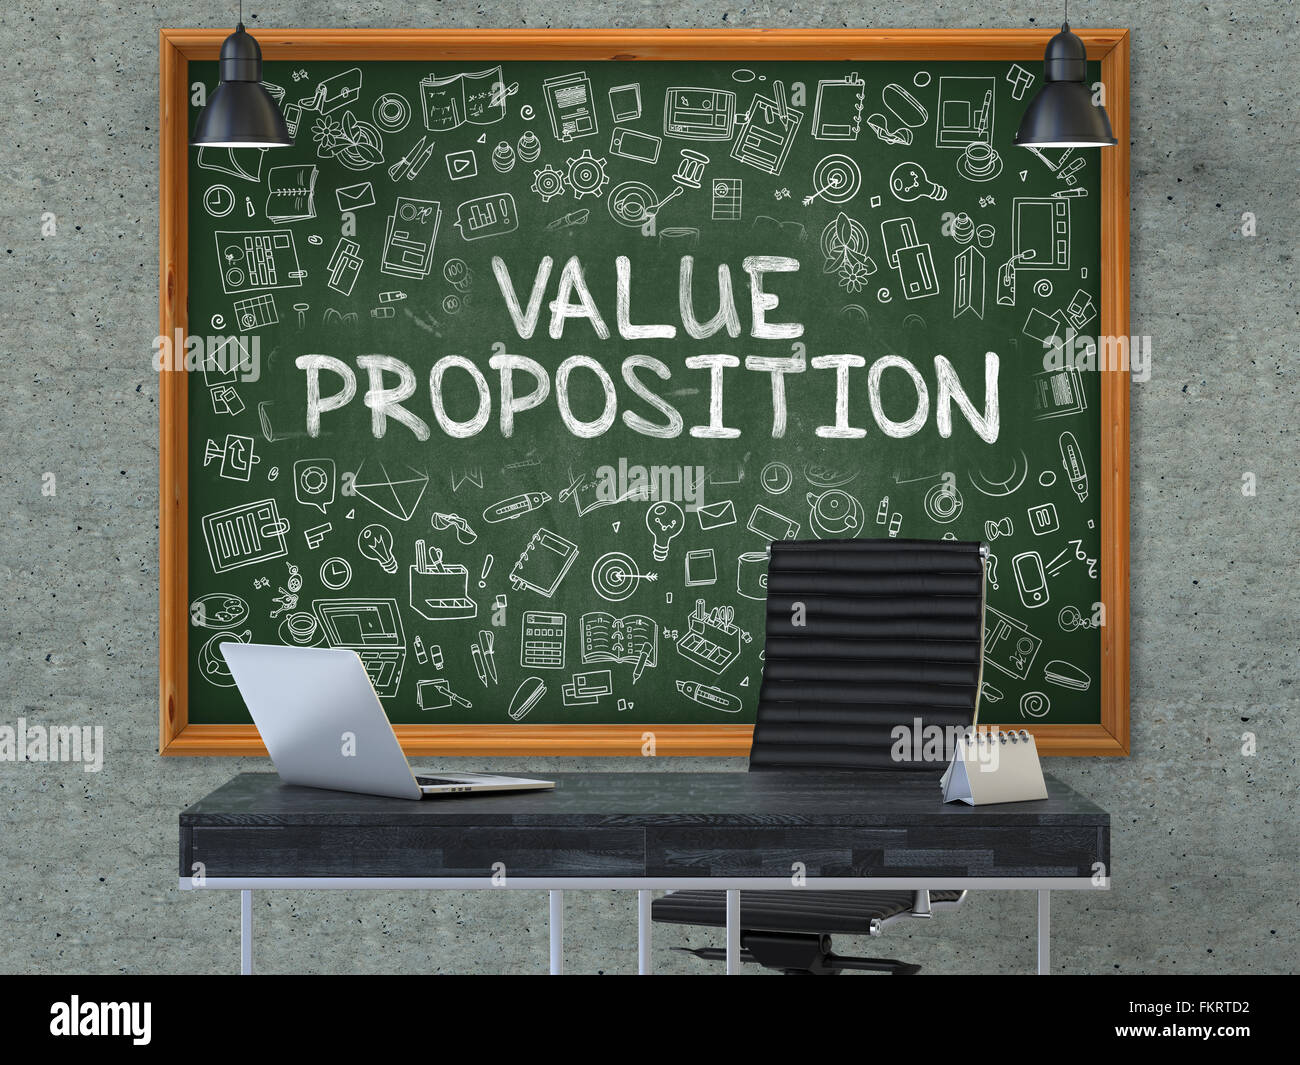 Value Proposition Concept. Doodle Icons on Chalkboard. Stock Photo